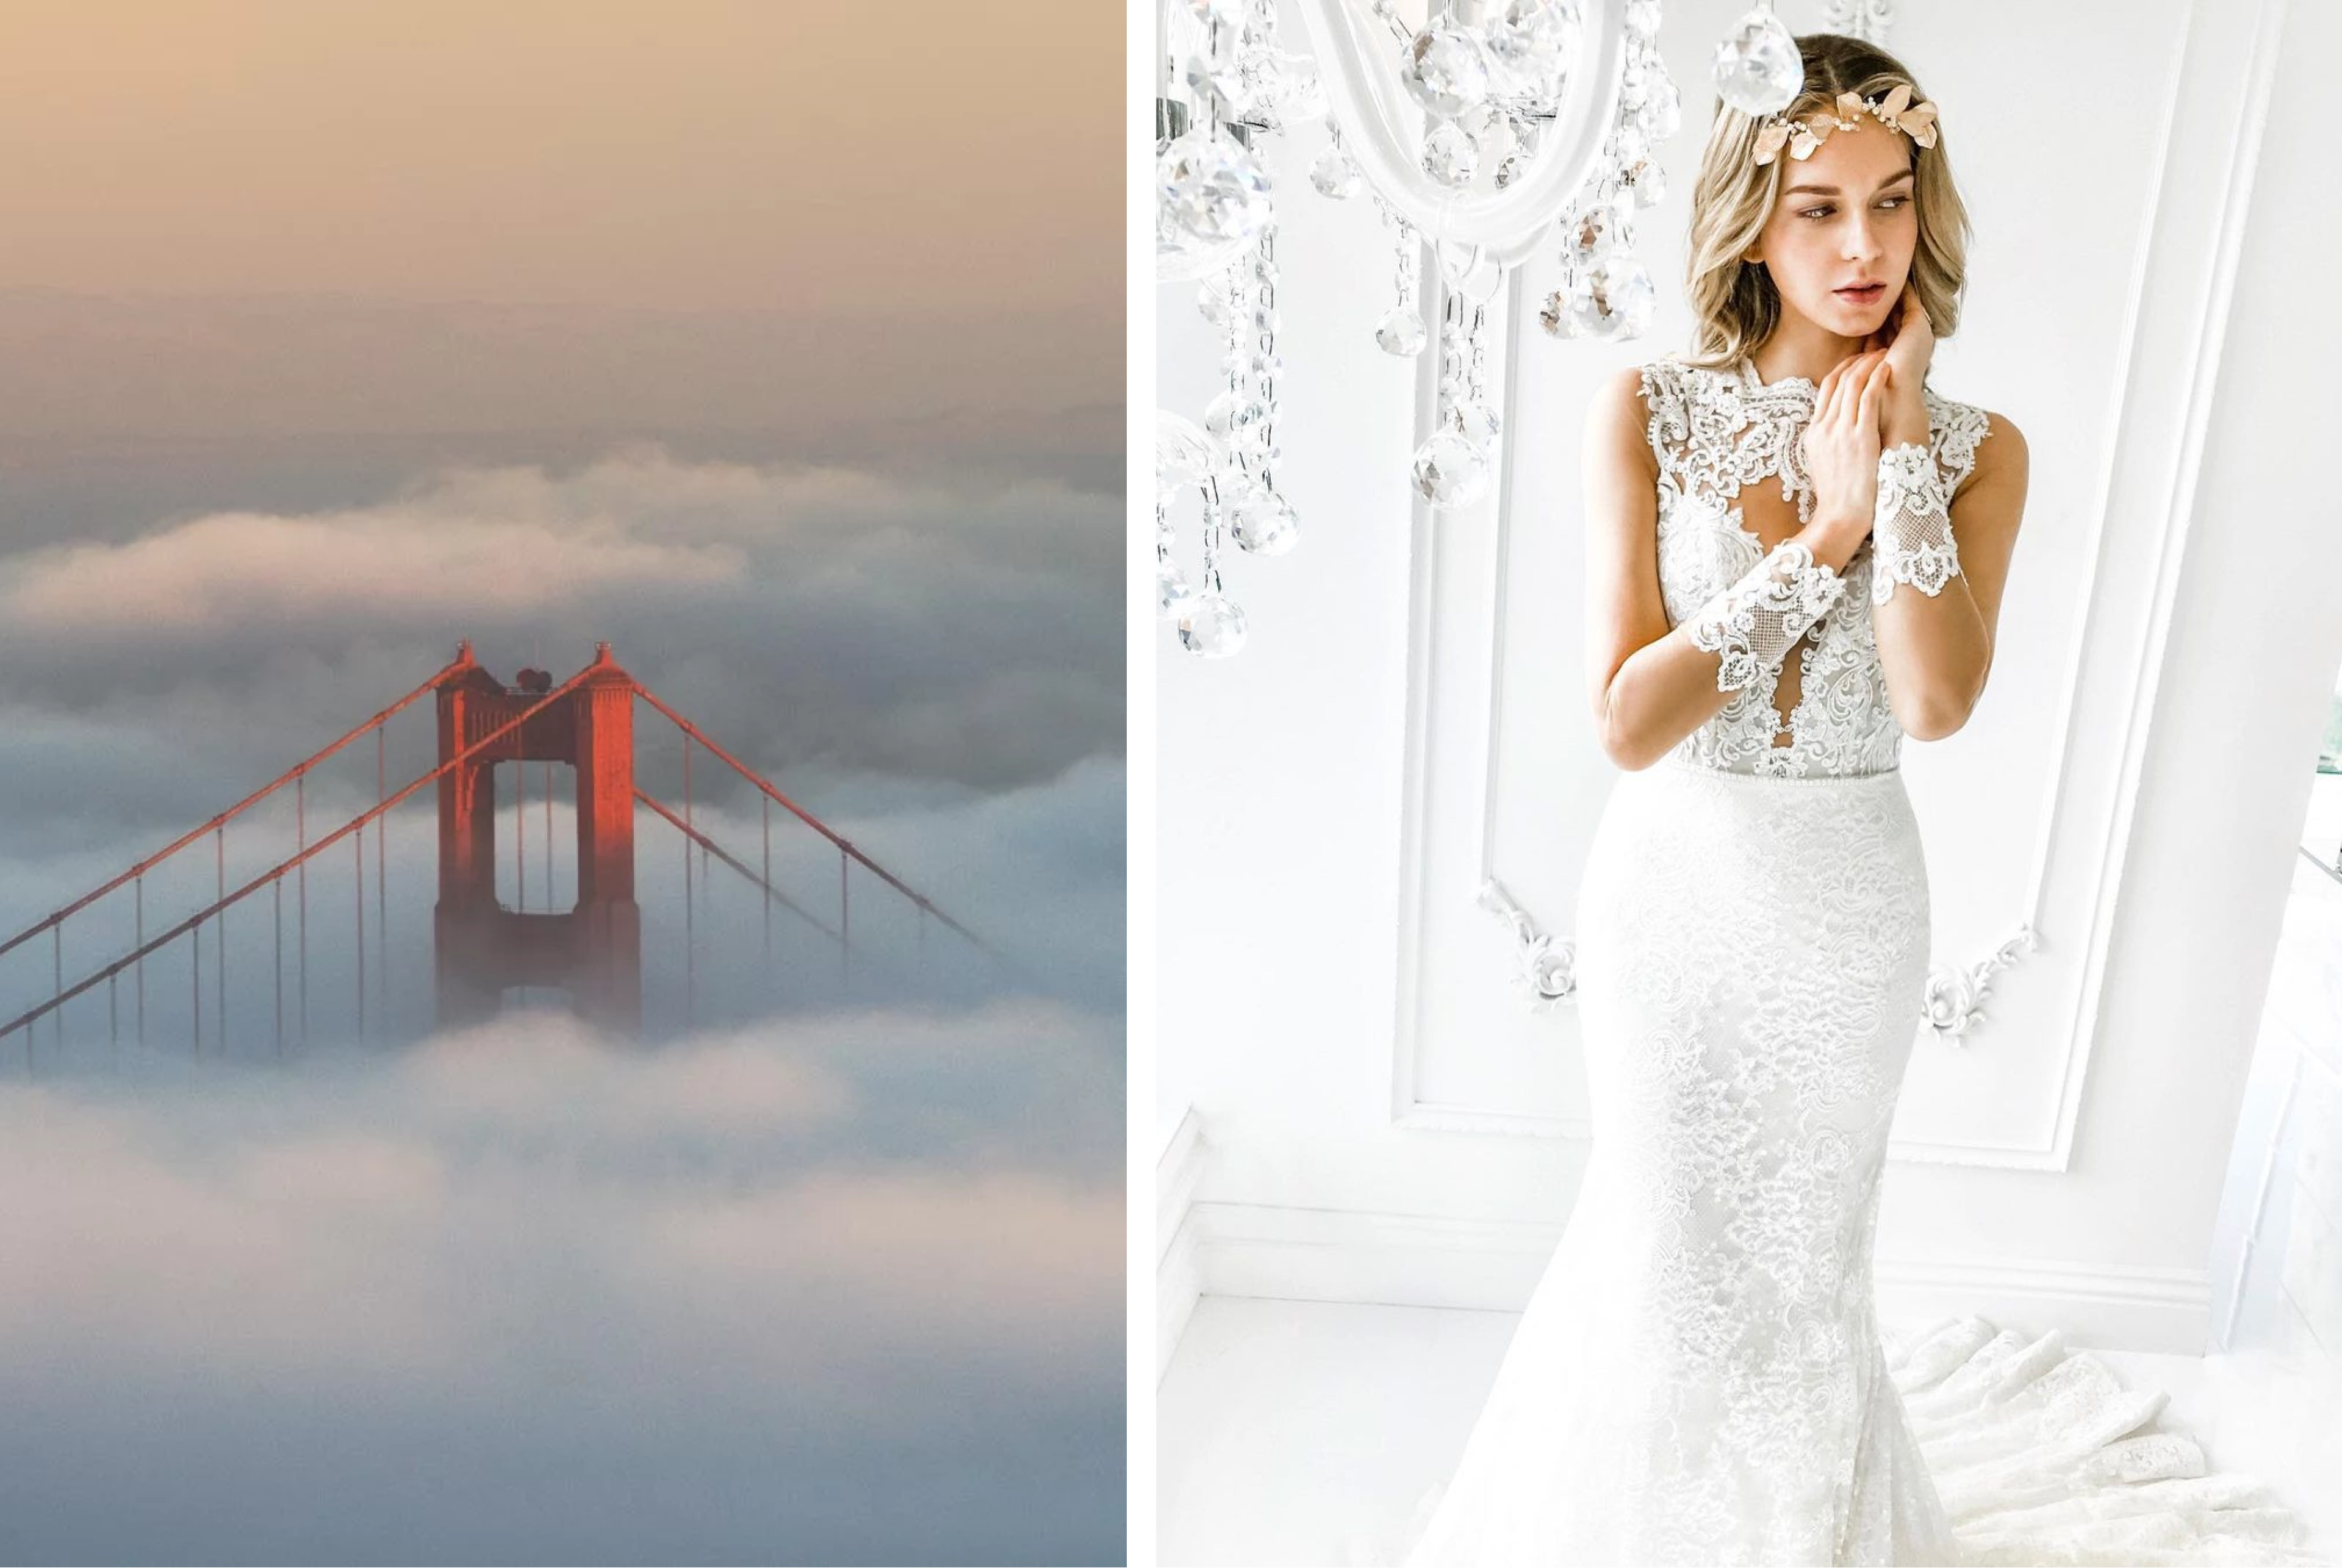 Top Trends for San Francisco Weddings